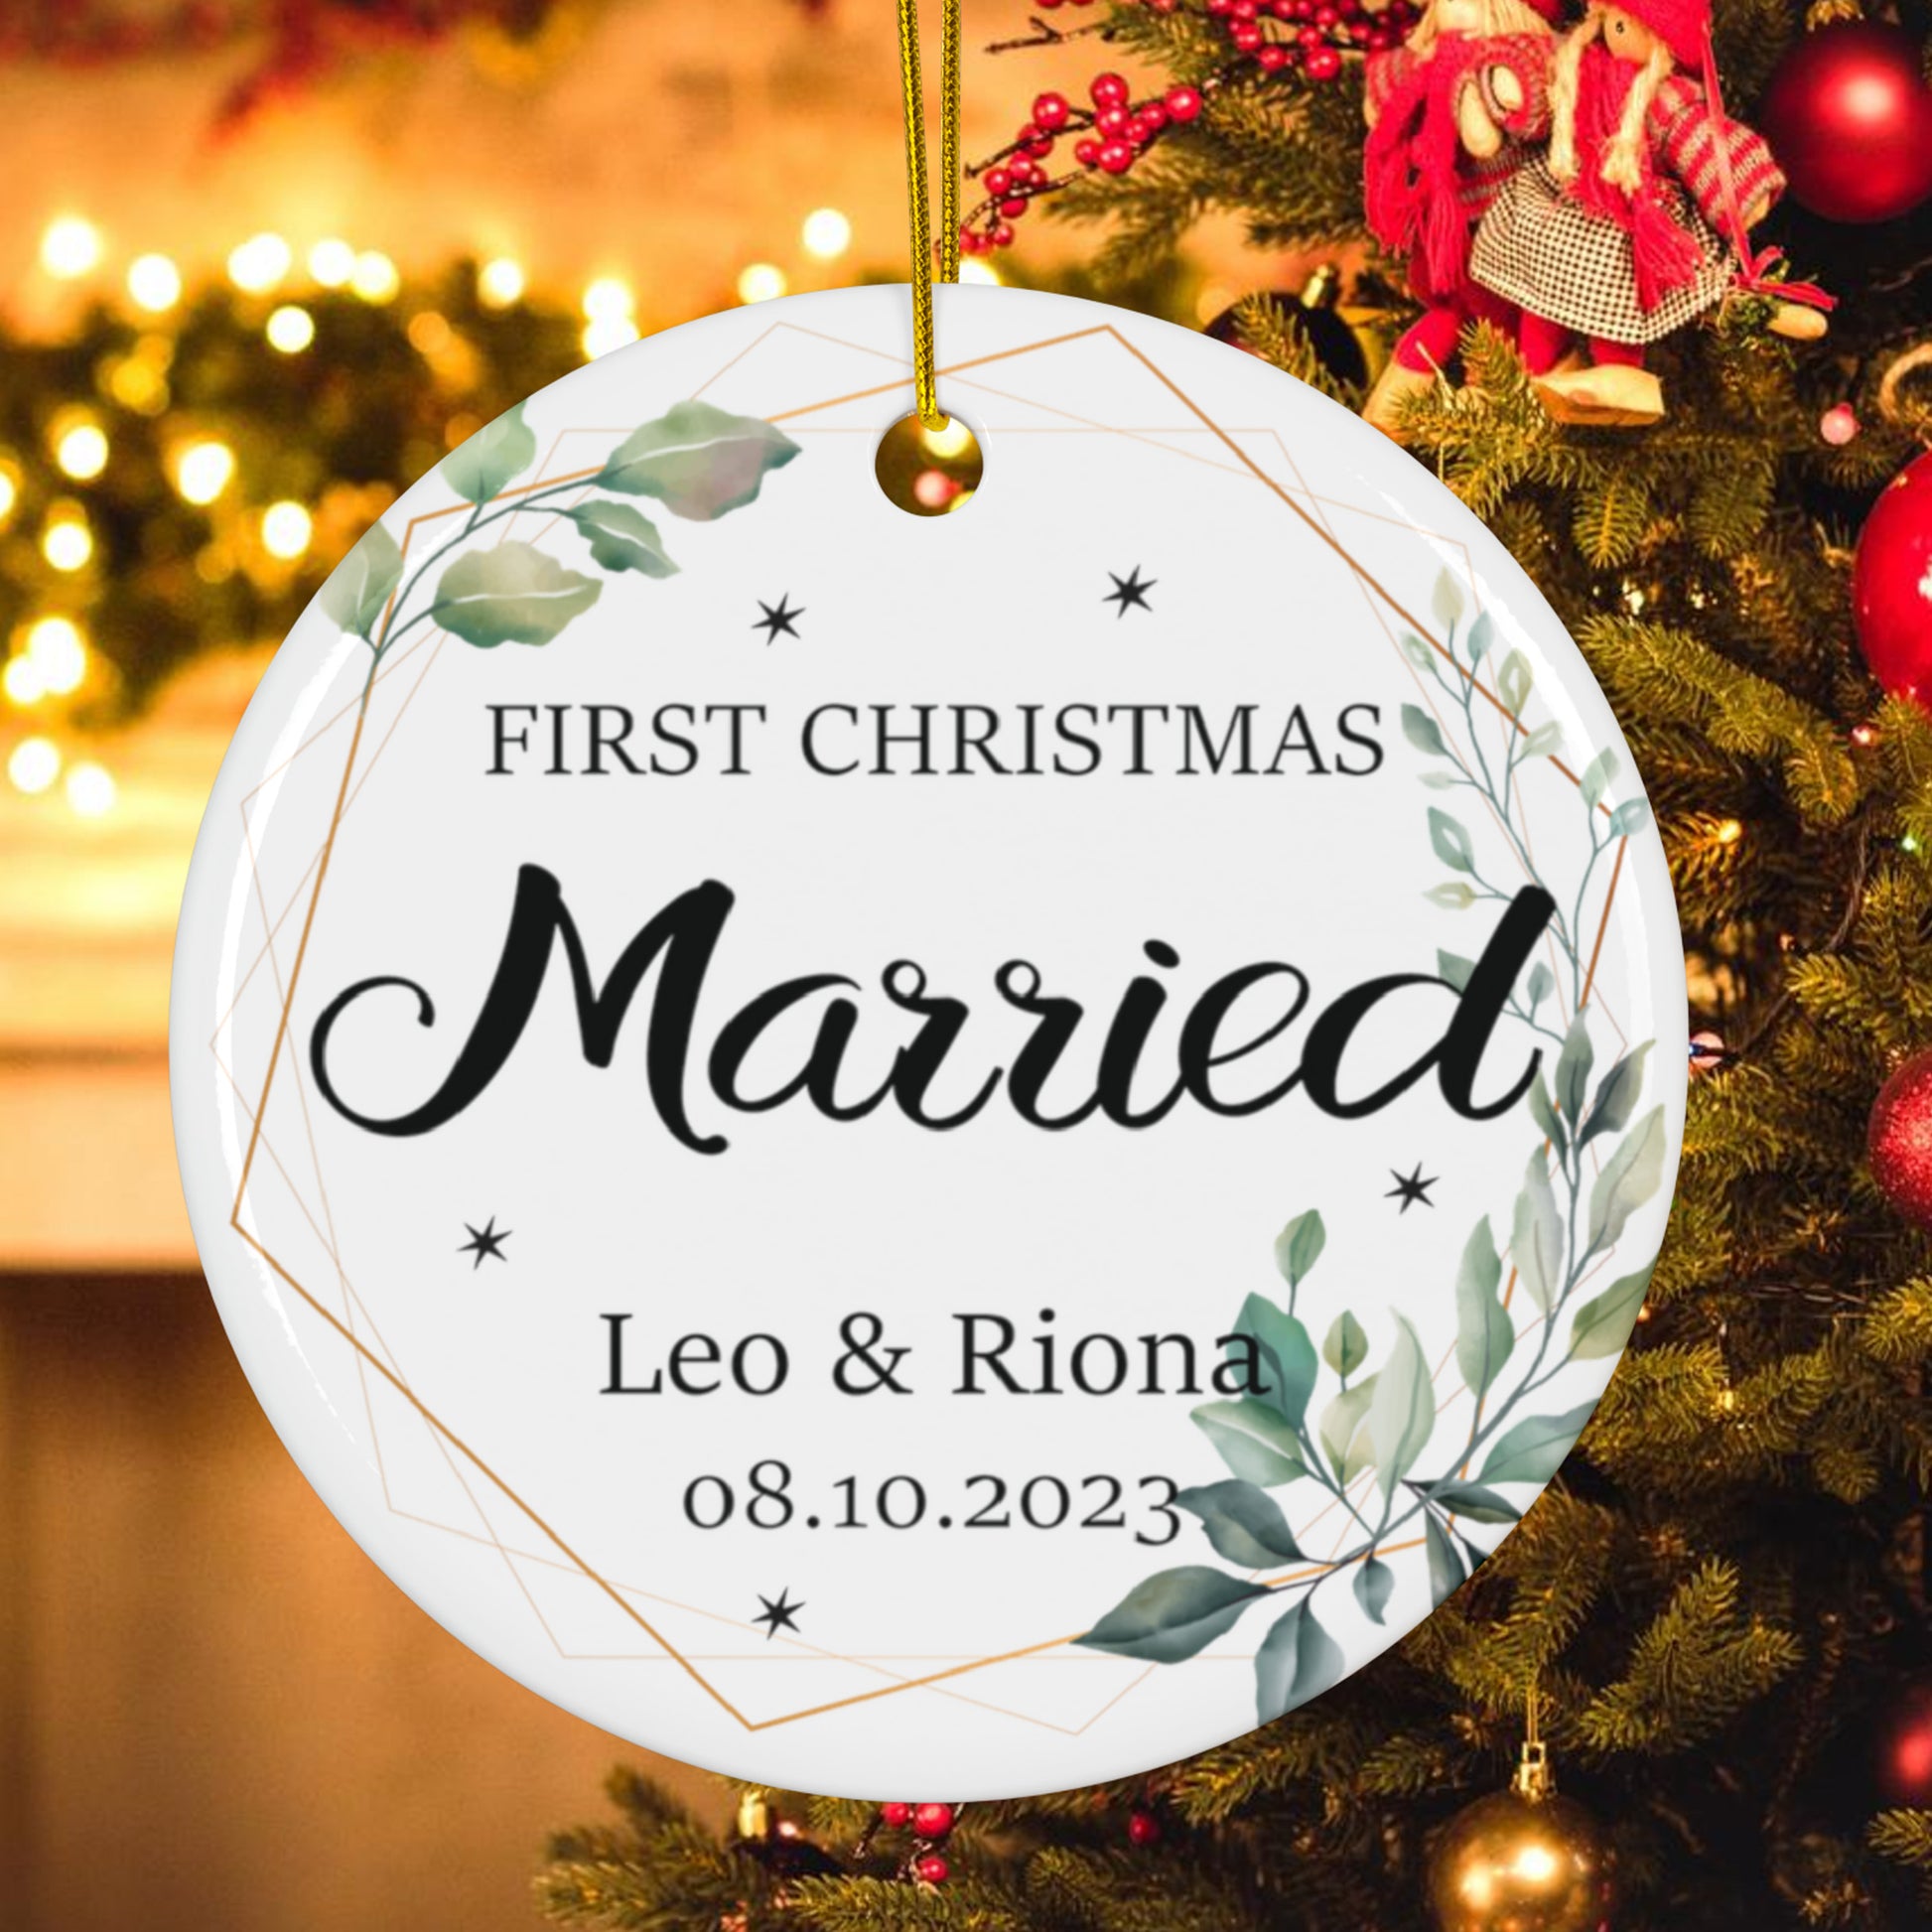 First Christmas Married Ornament gifts